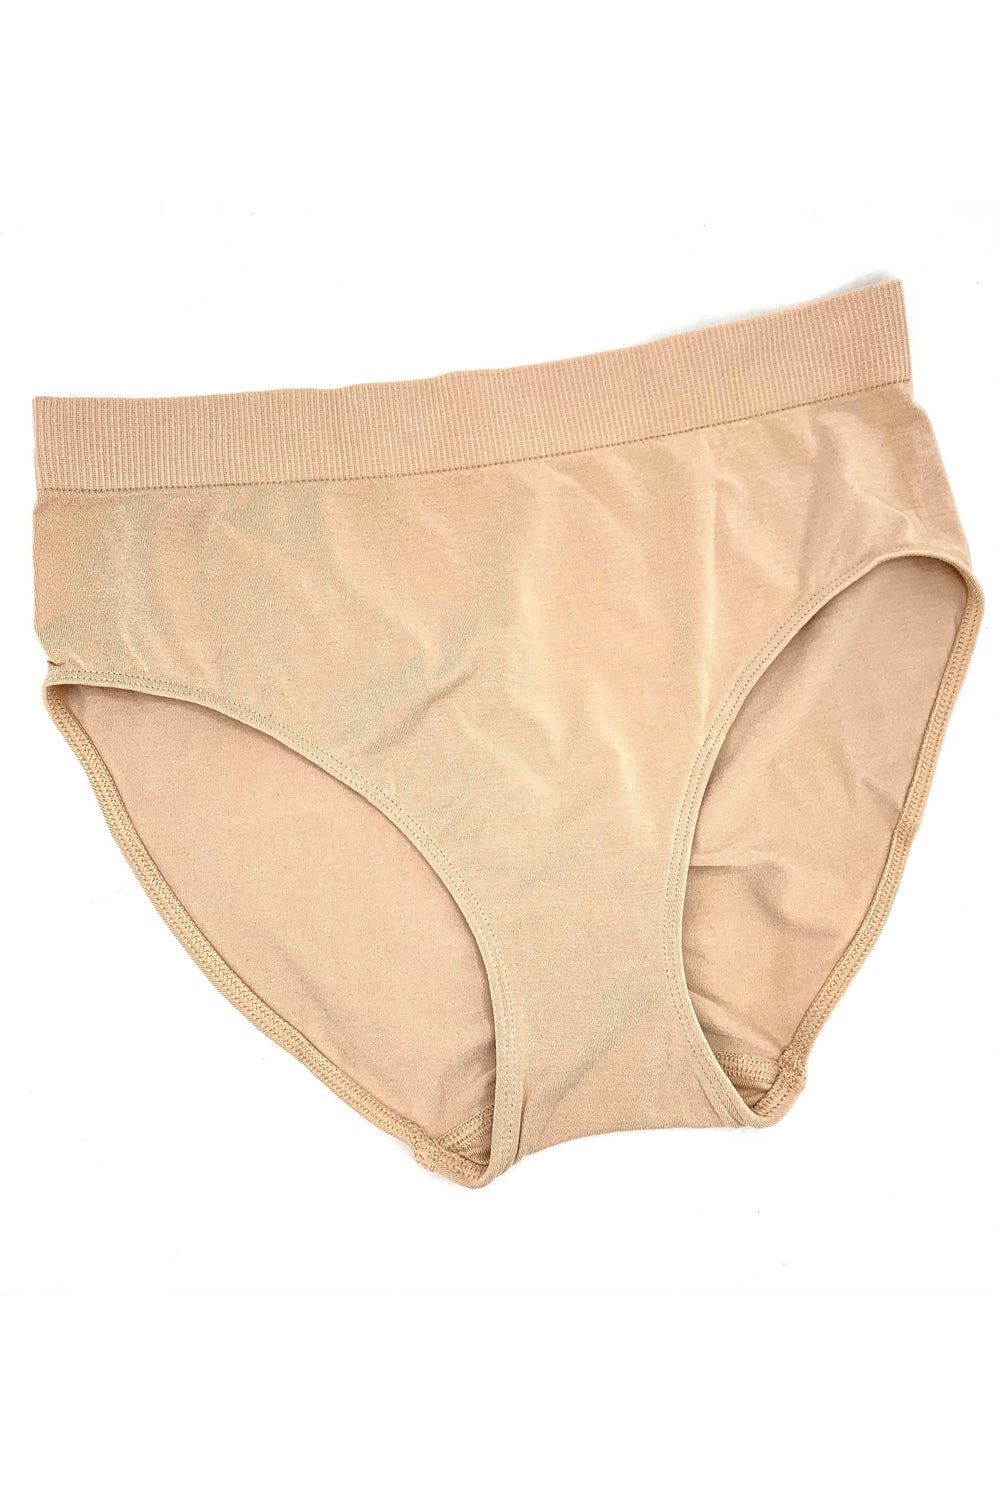 Bamboo Underwear 2 pack - Full Brief High Waisted Panty